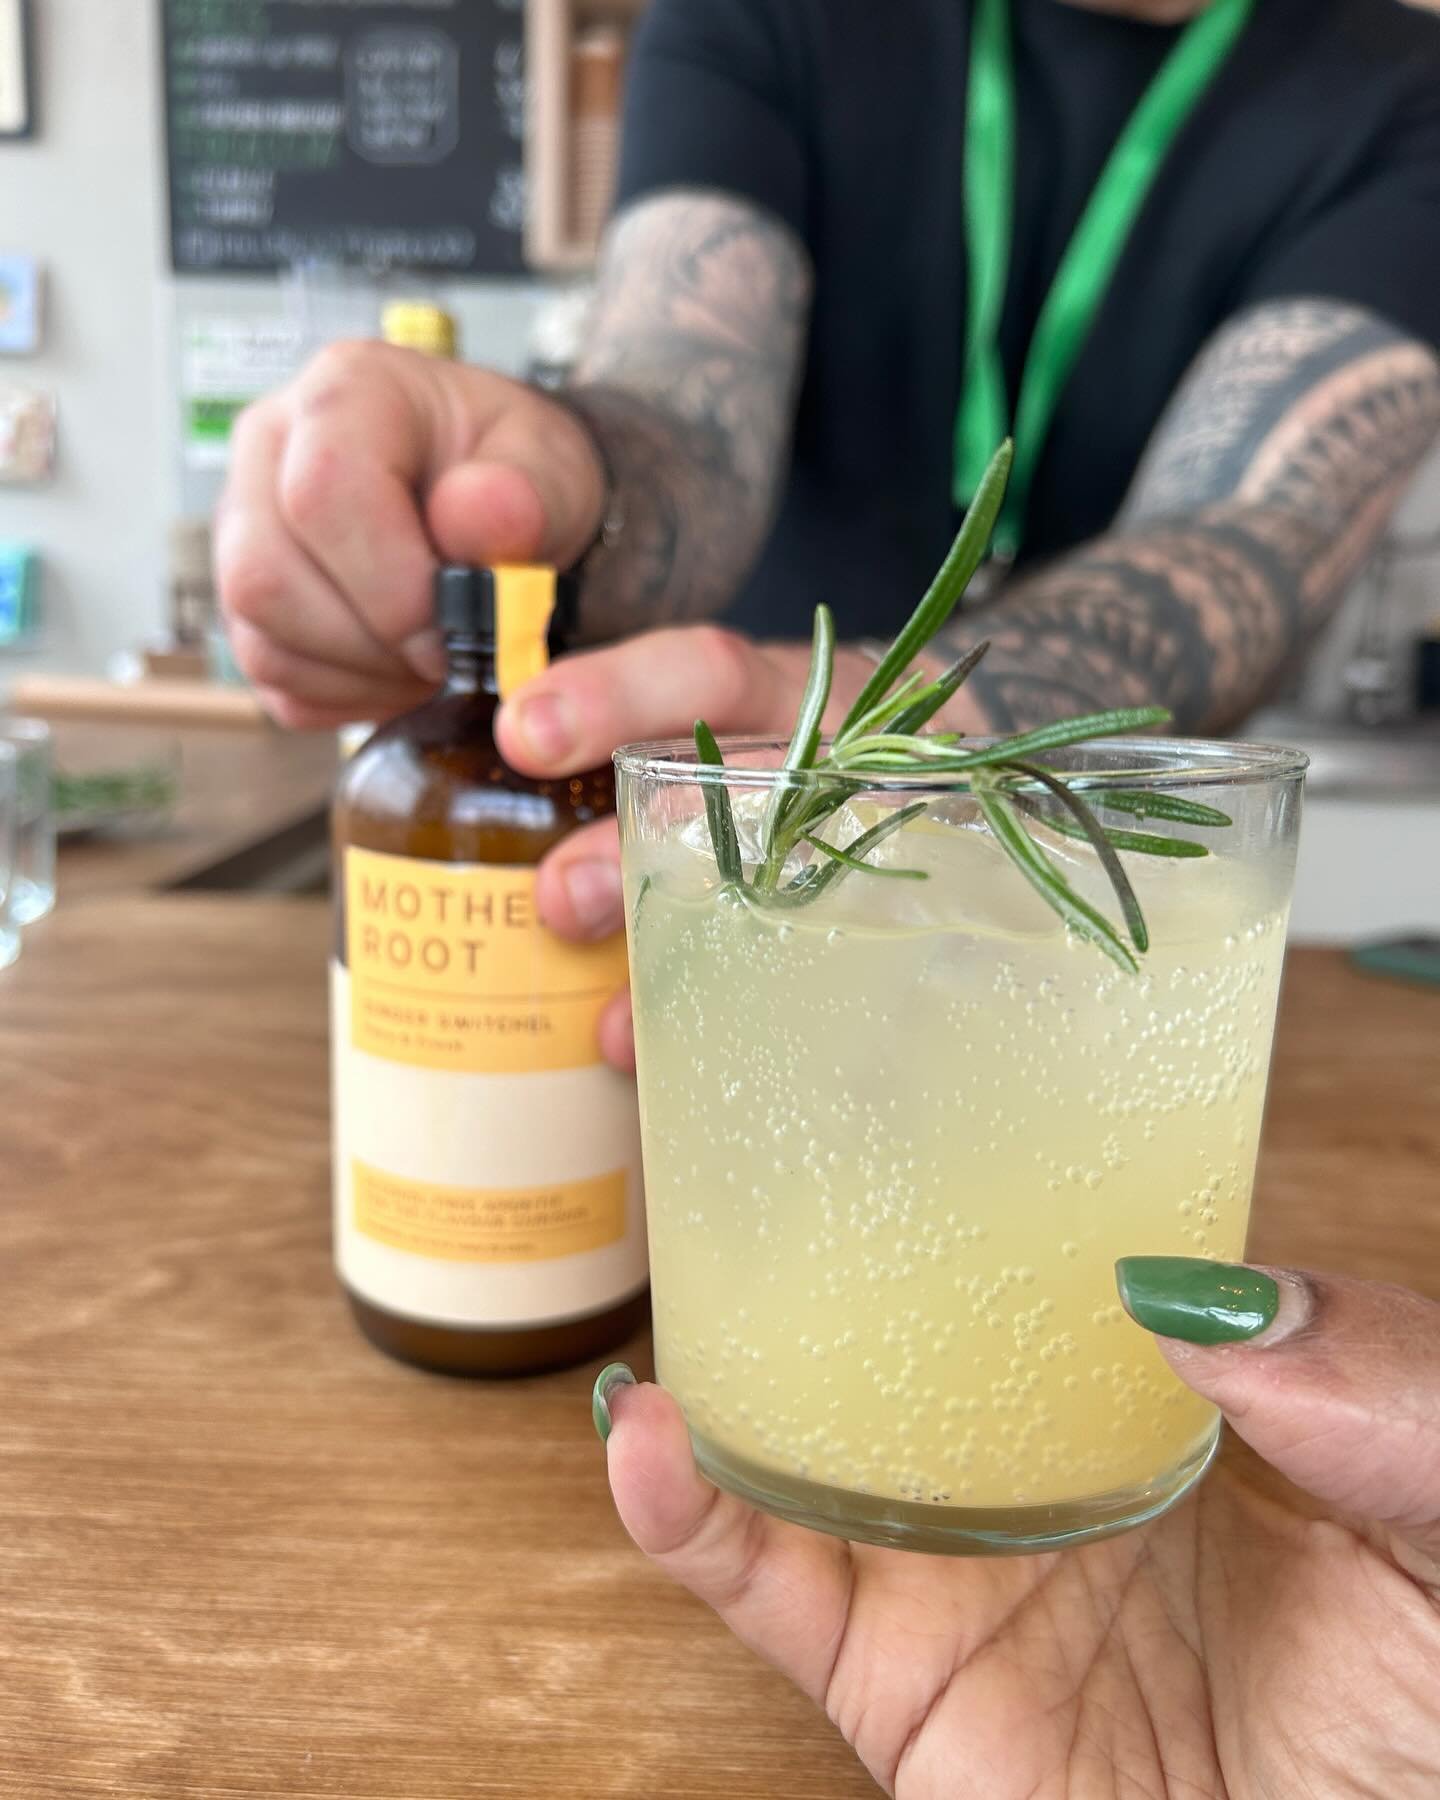 Non alcoholic never looked this good! @motherrootldn Ginger Switchel now served at By Max as an alternative to wine and cocktails - come and try and let us know what you think!  #nonalcholicdrinks #nonalchoholiccocktail